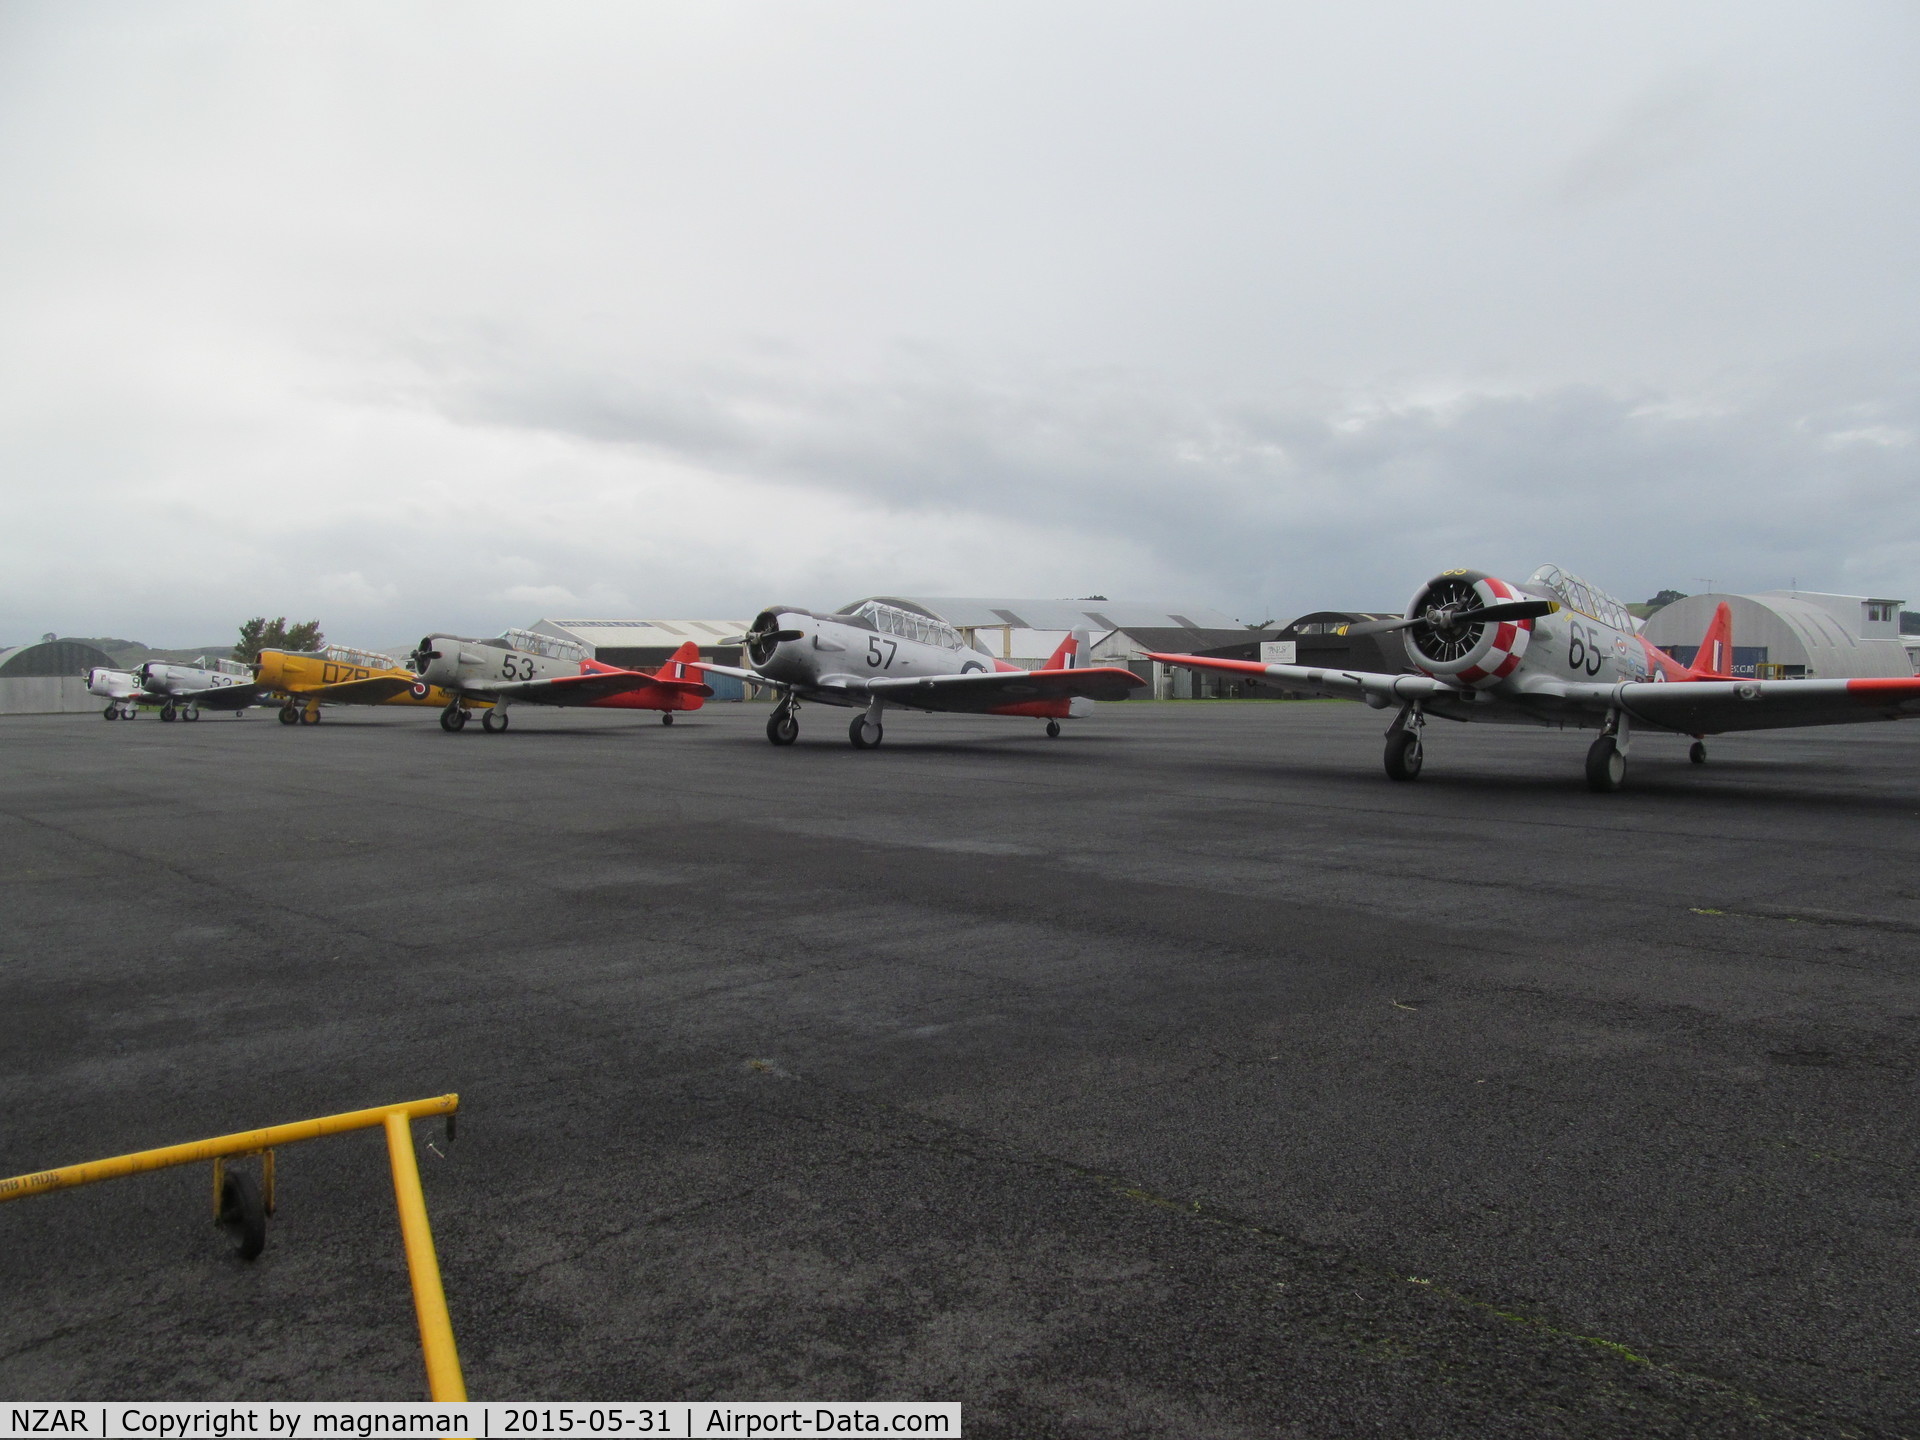 Ardmore Airport, Auckland New Zealand (NZAR) - 6 out of the 7 harvards on display yesterday